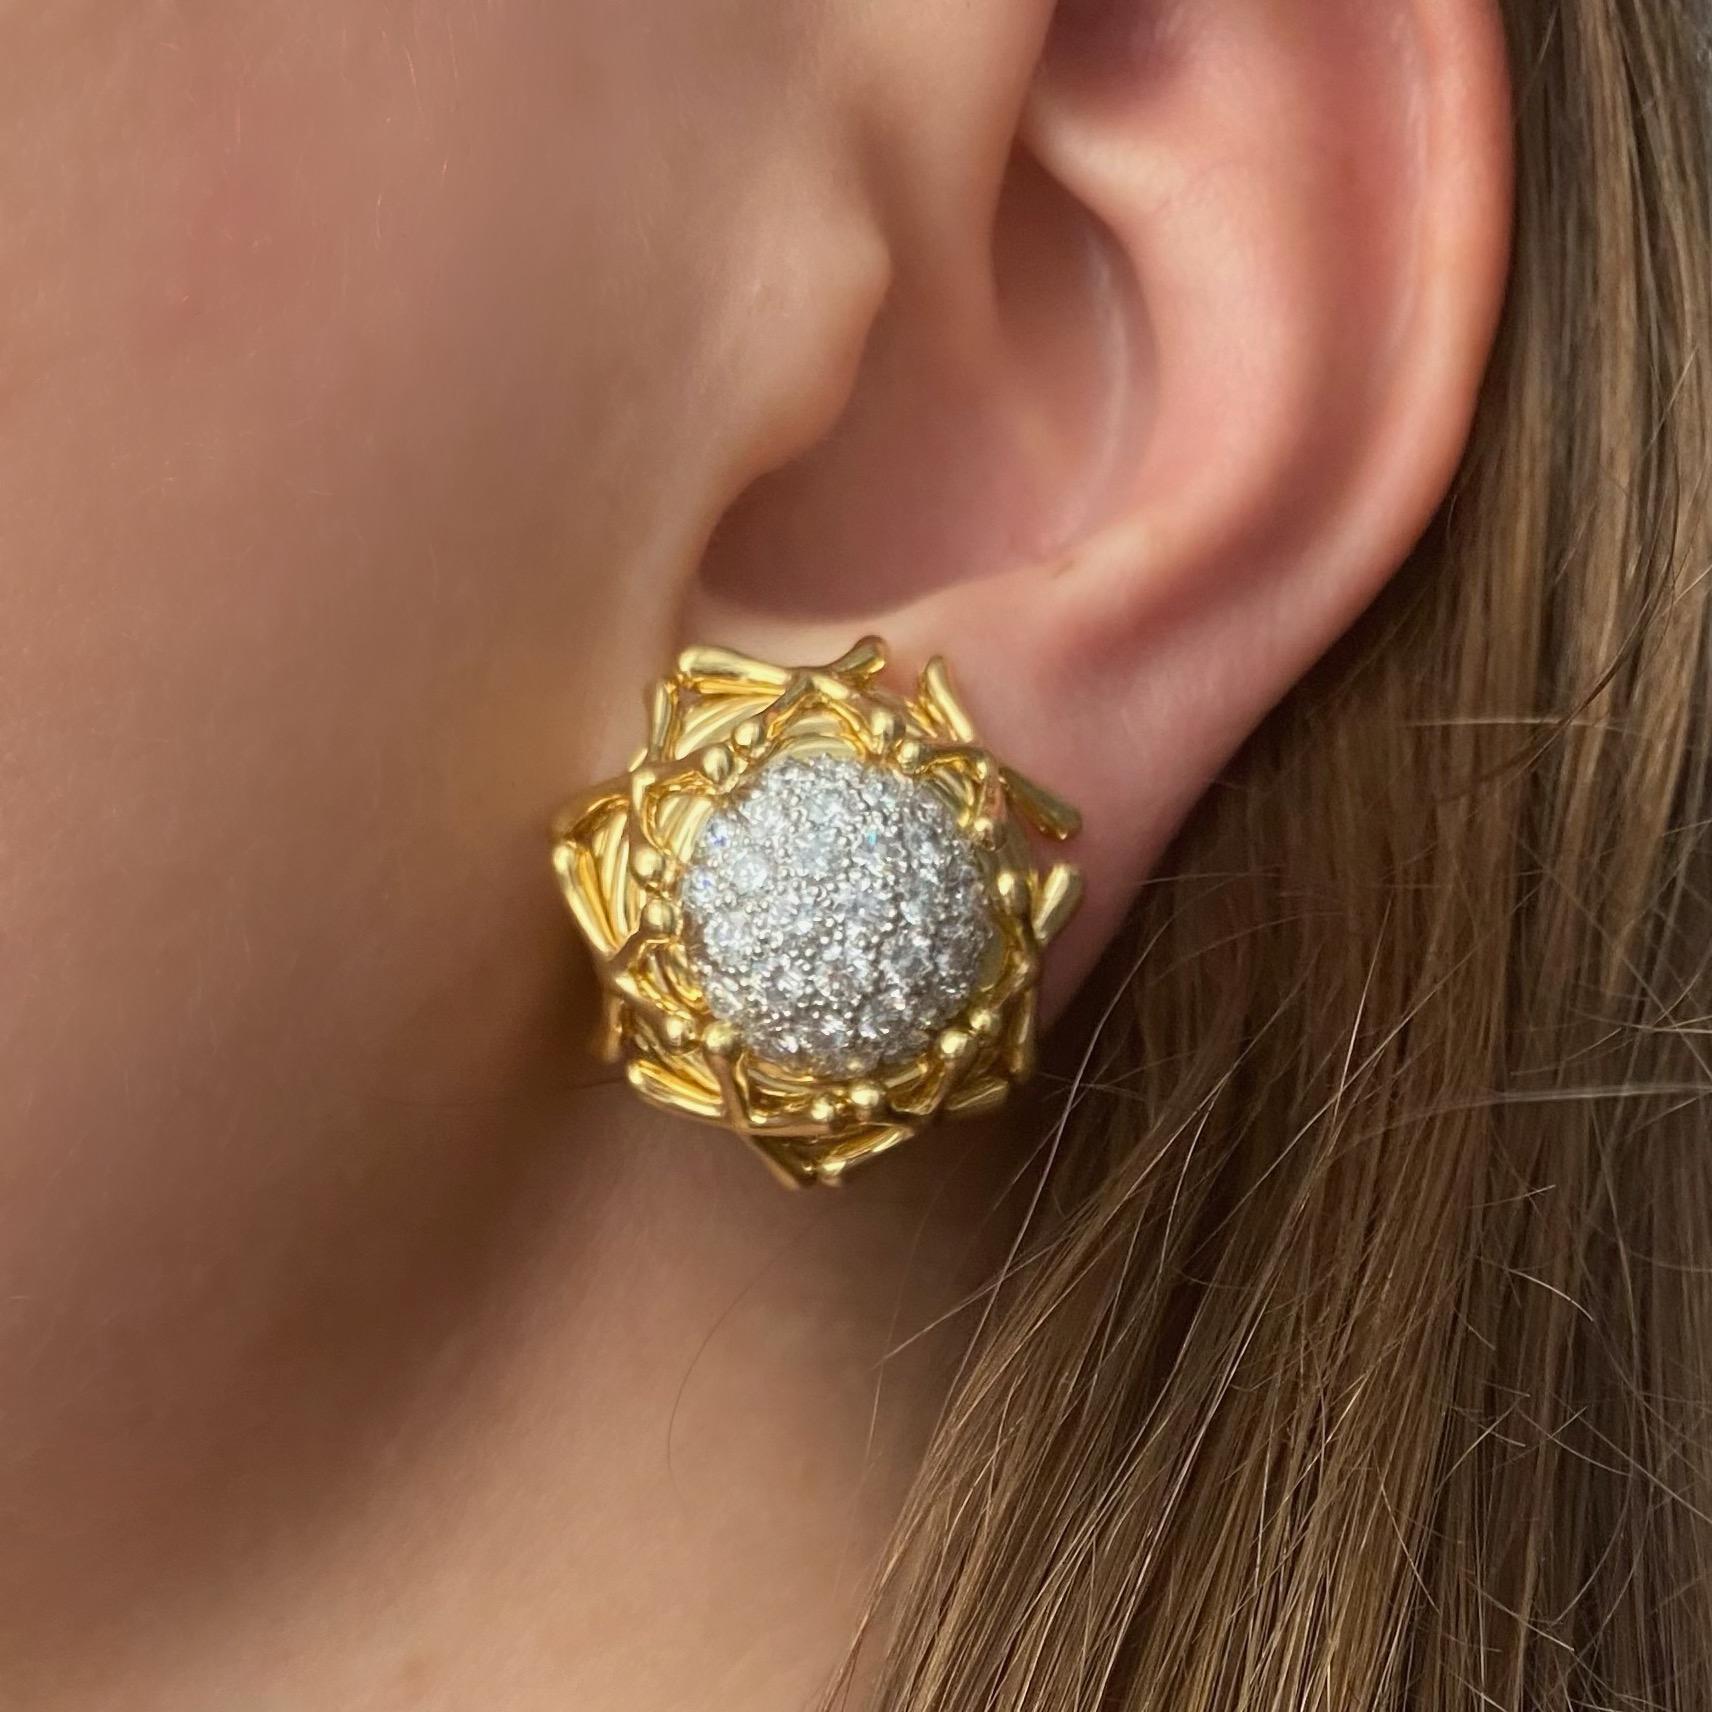 Tiffany & Co. Jean Shlumberger diamond clip on earrings in 18k yellow gold. These impressive earrings have platinum centers pave set with total of 62 round brilliant cut diamonds with weight of approximately 3.5 carats color F-G, clarity VS.